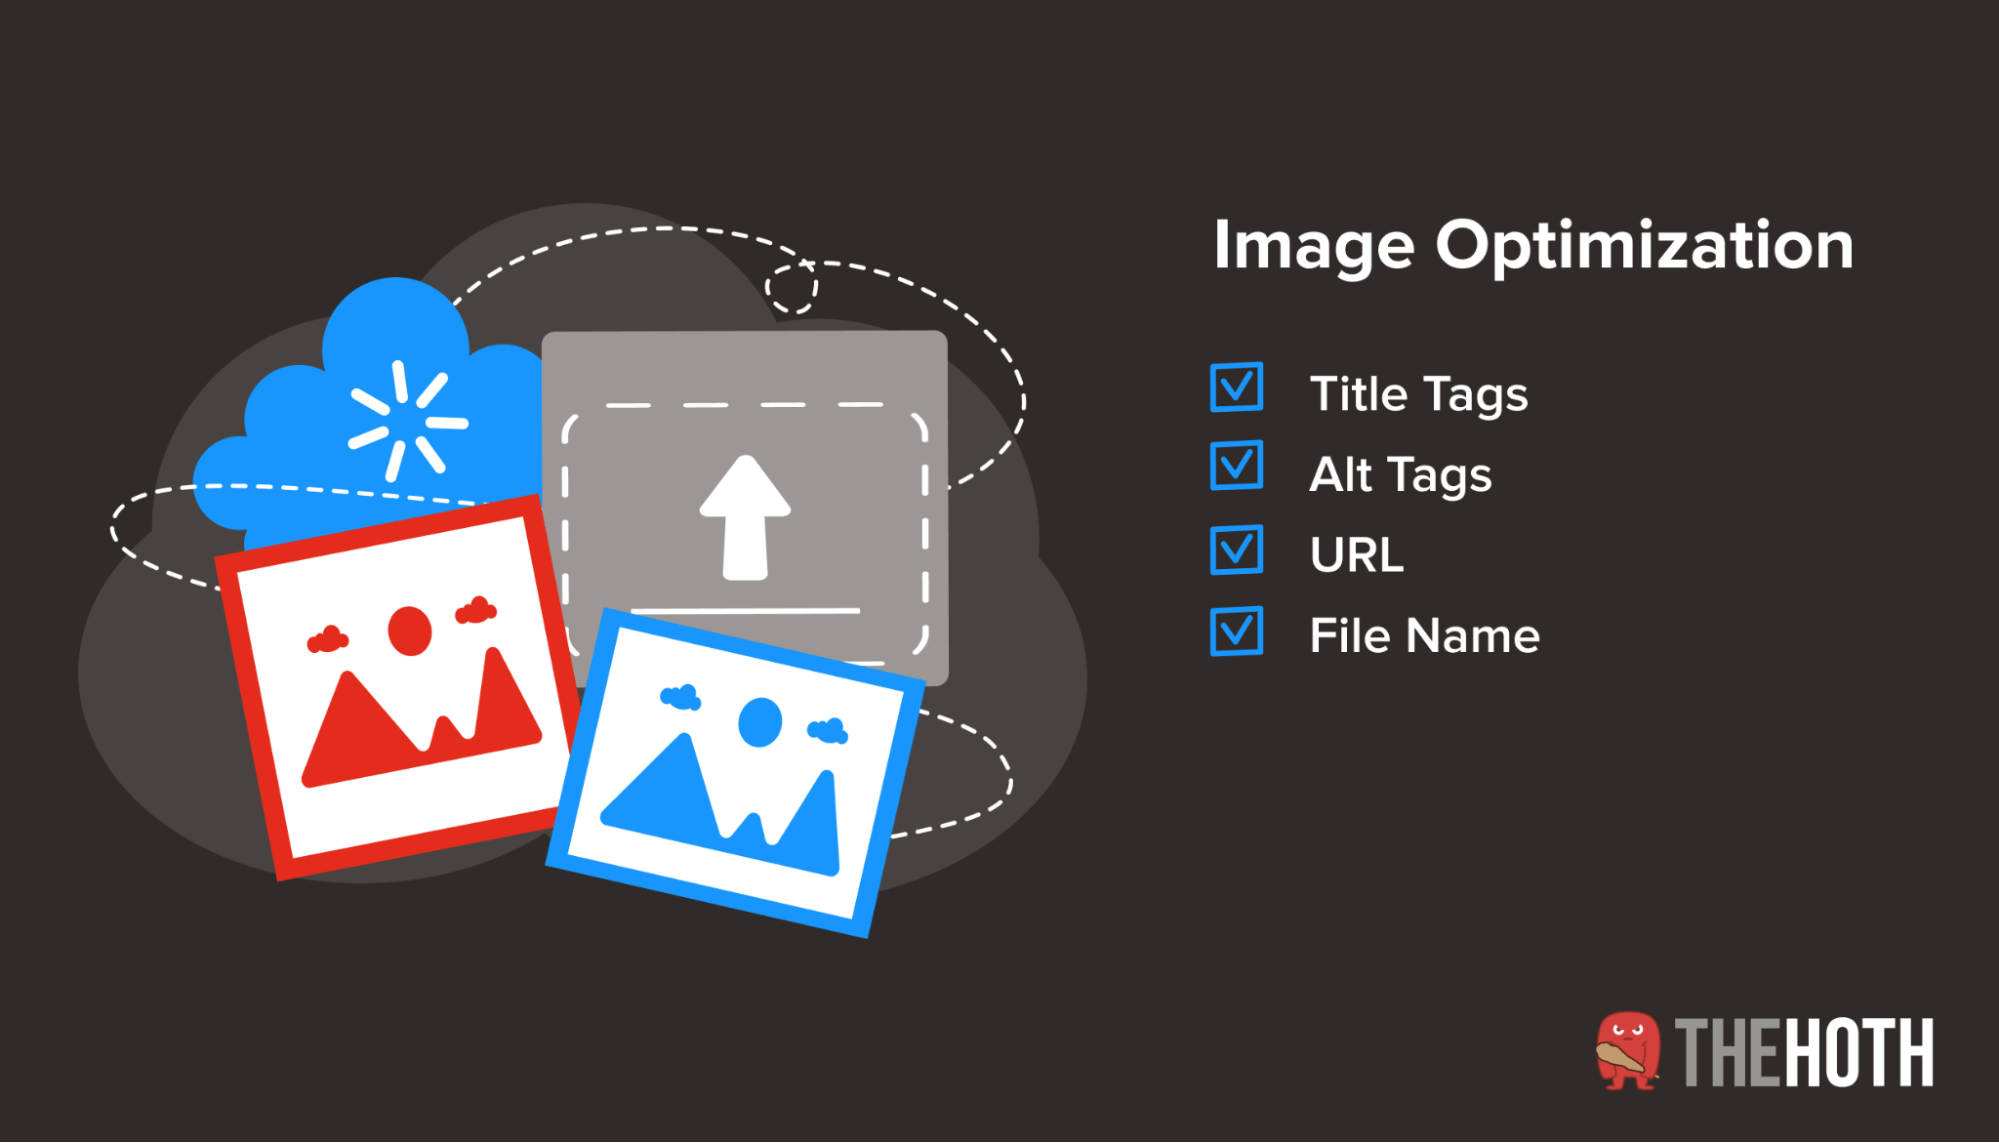 A checklist showing how to optimize images for SEO